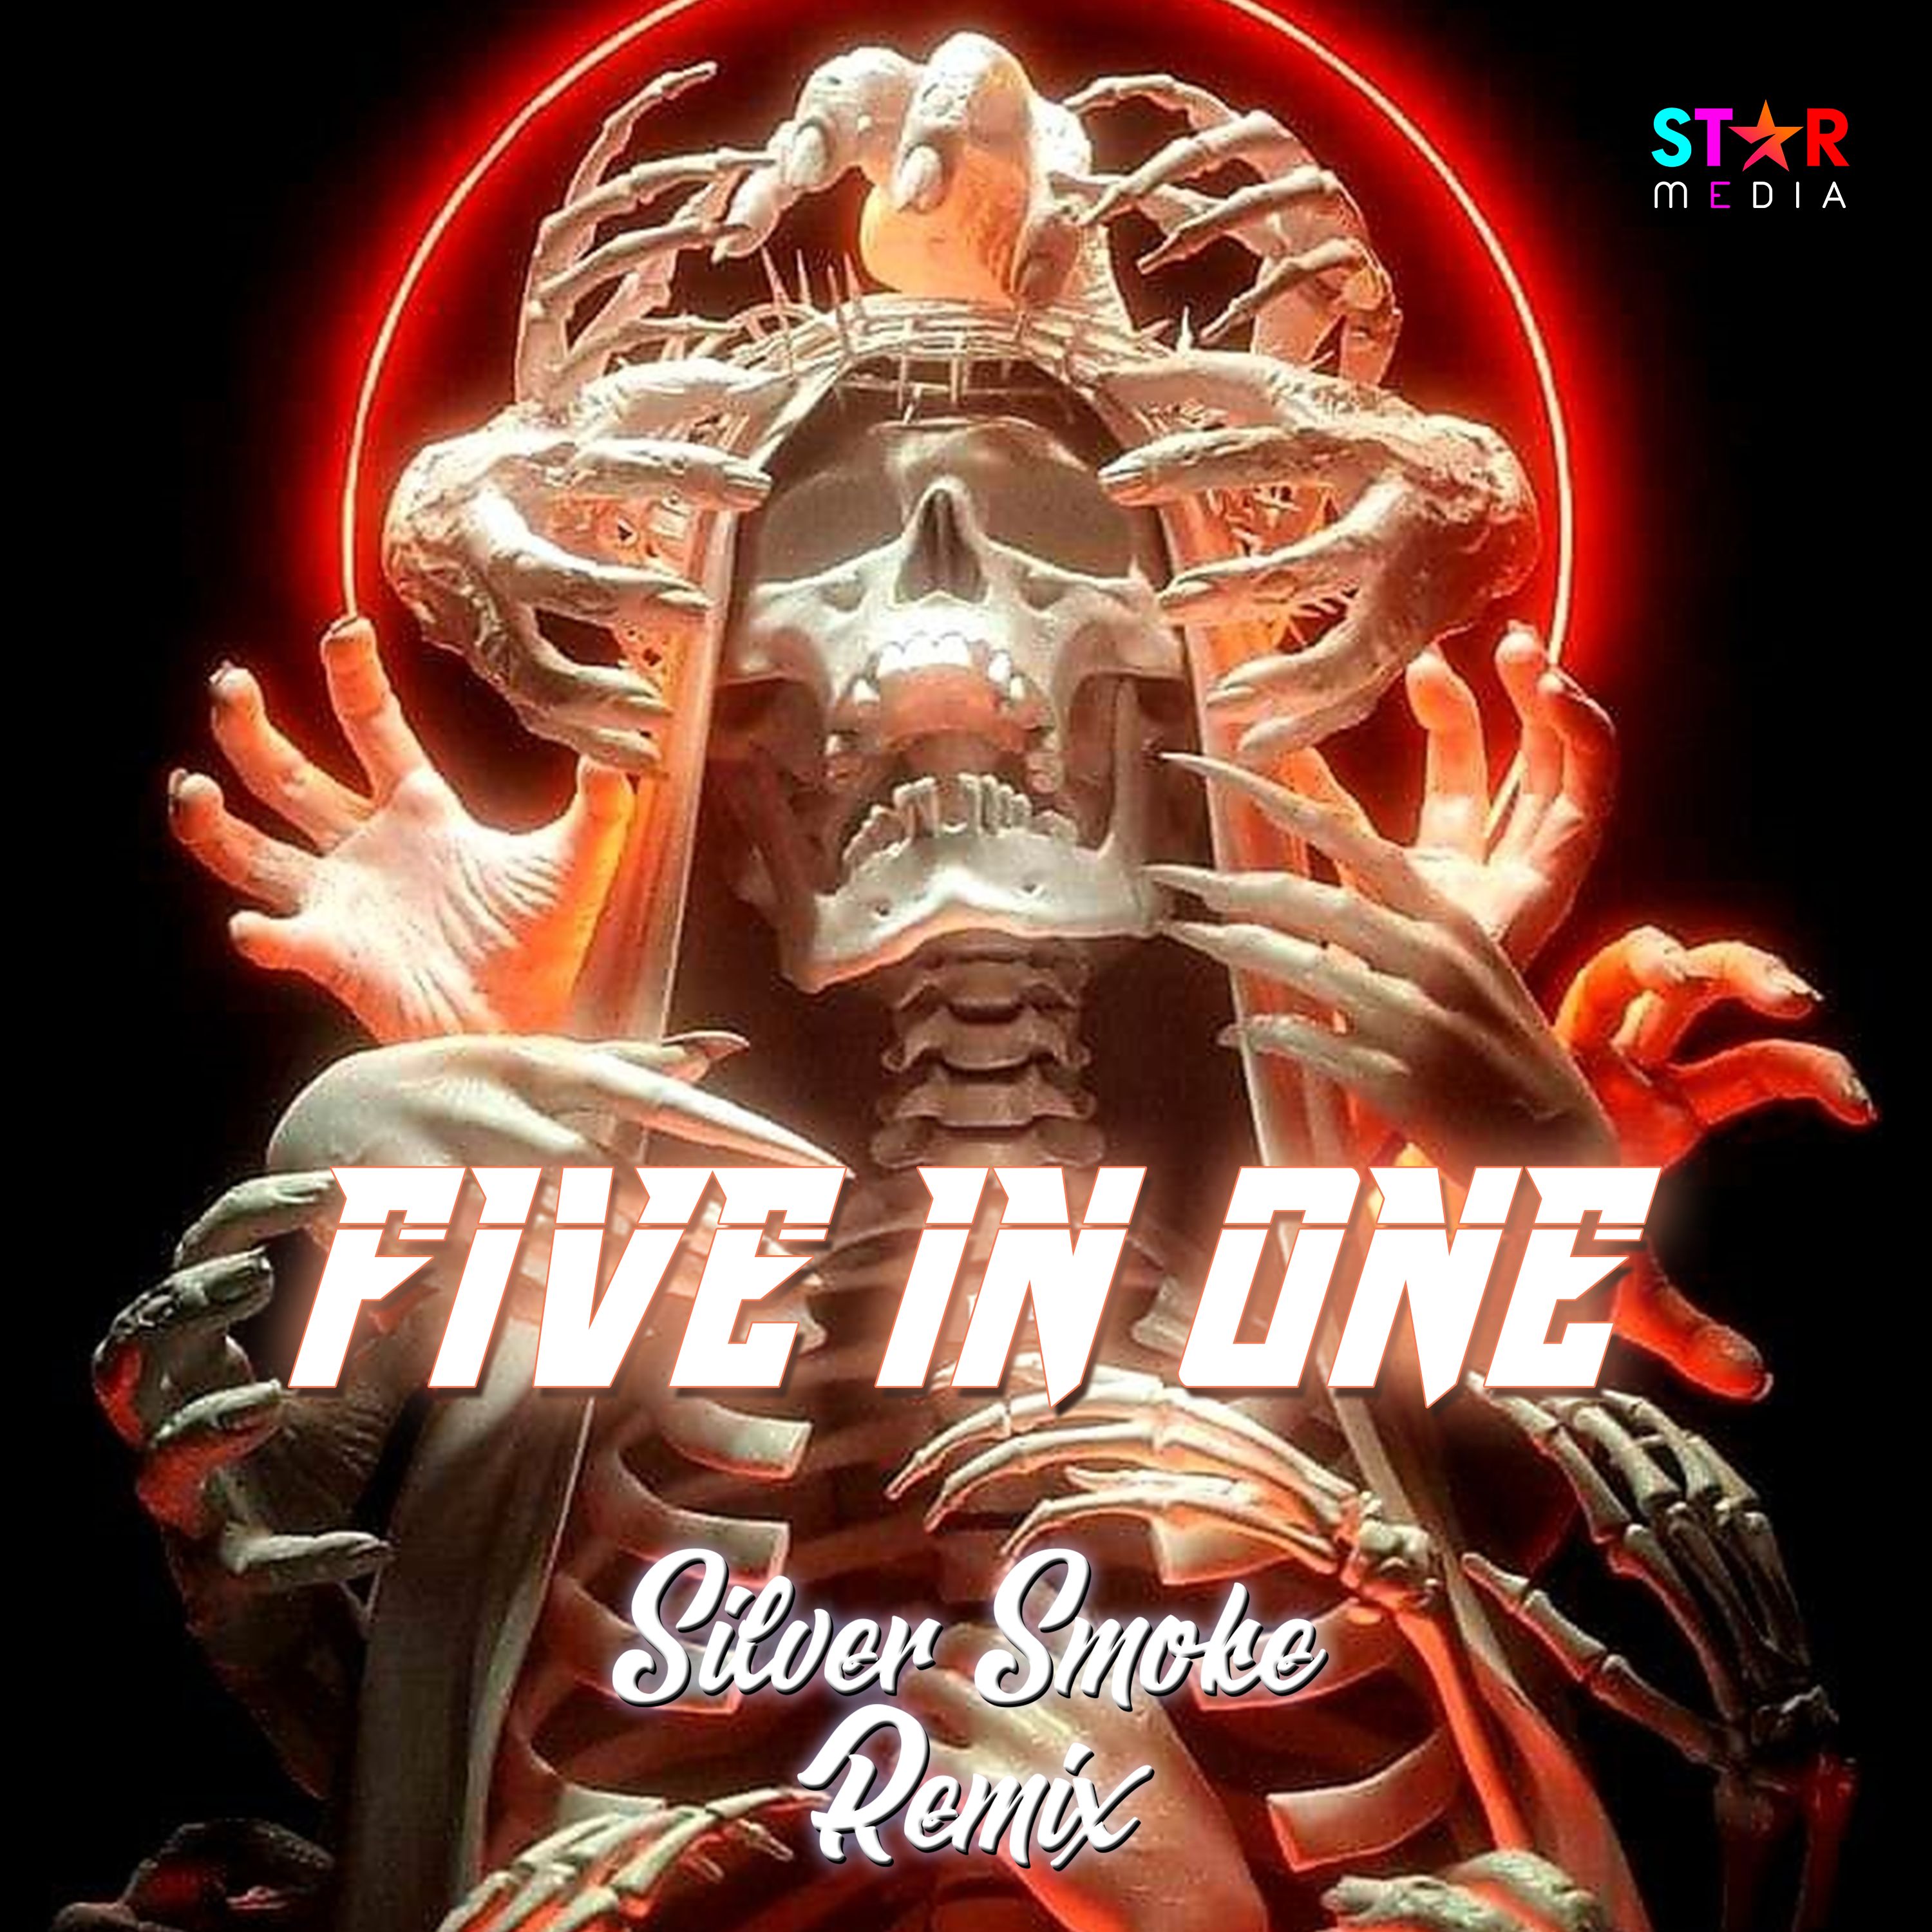 Download 5 IN 1 - SILVER SMOKE REMIX (Out Out,The Magic Key,Butterfly,Party Started,Bóng Tối Trước Bình Minh)